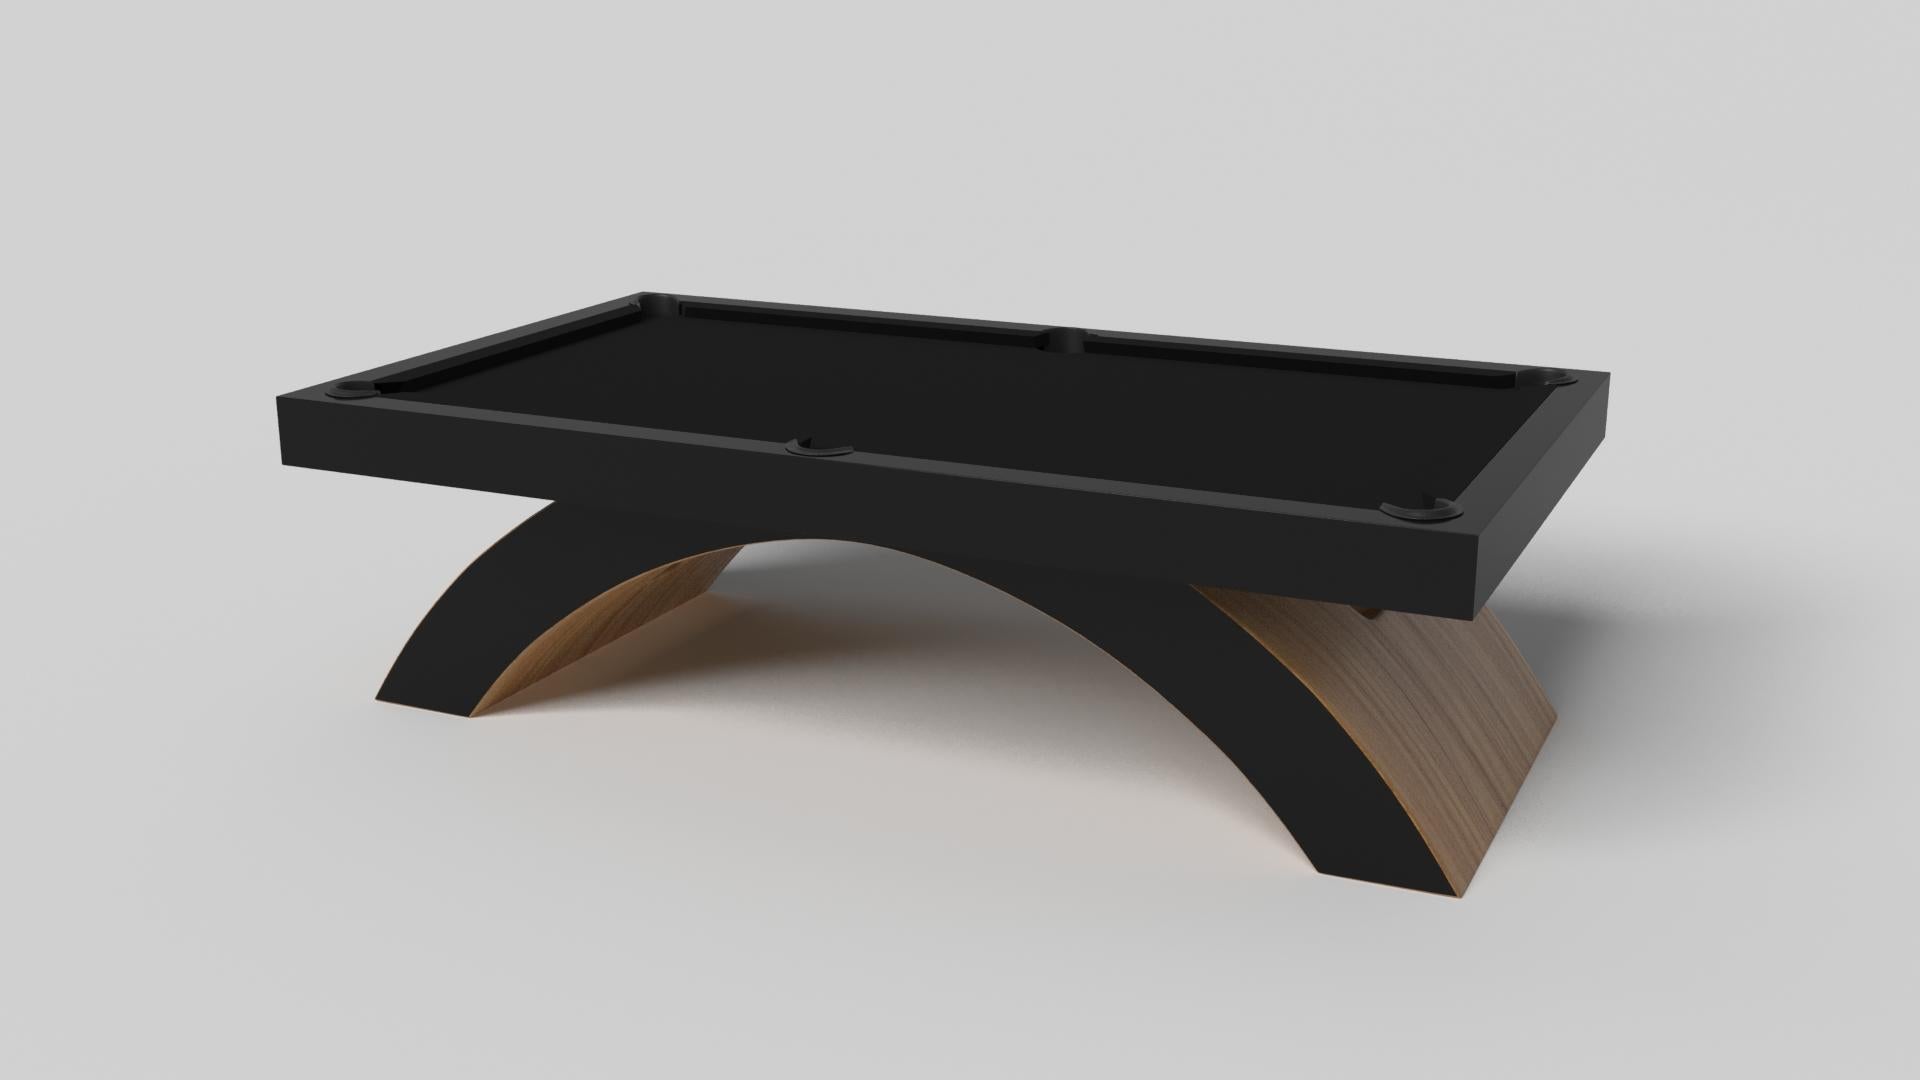 An open, arched base balances beautifully against the hard edges of the rectangular surface top, making the Zenith pool table in black with red a striking juxtaposition of modern, geometric forms. Minimalist in its appeal yet luxurious in design,